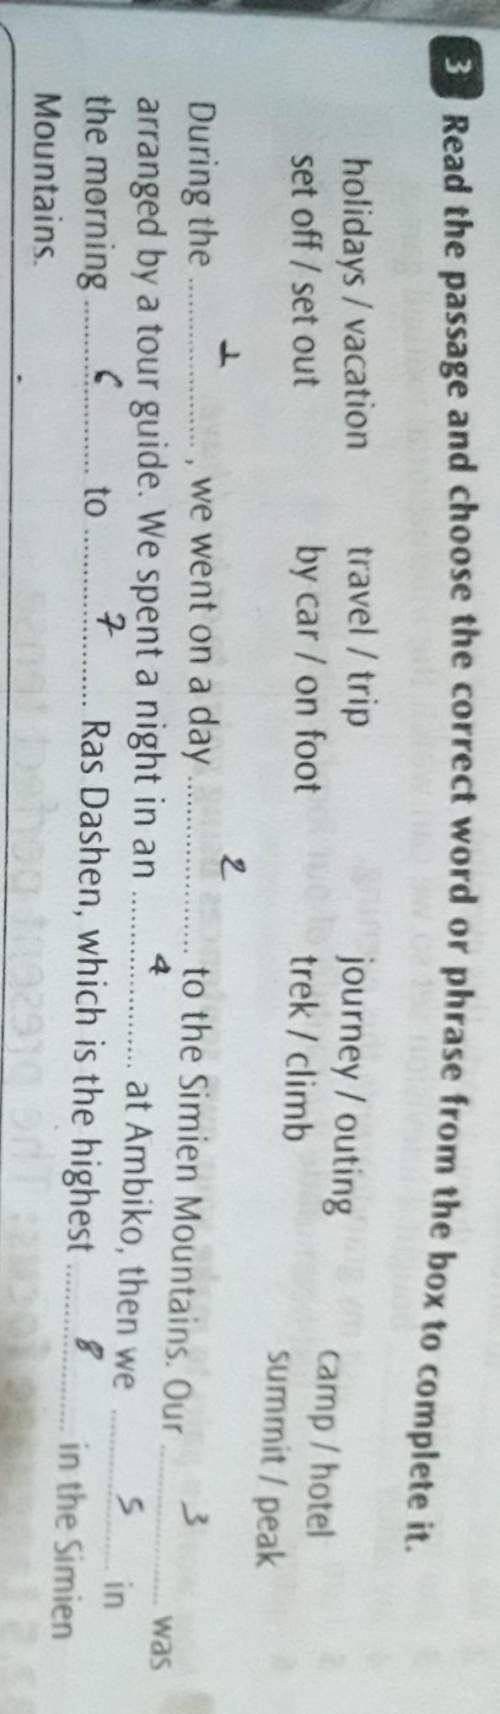 Plz answer to me this correctly then i will give the brailiest okay and you will have 25 points plz